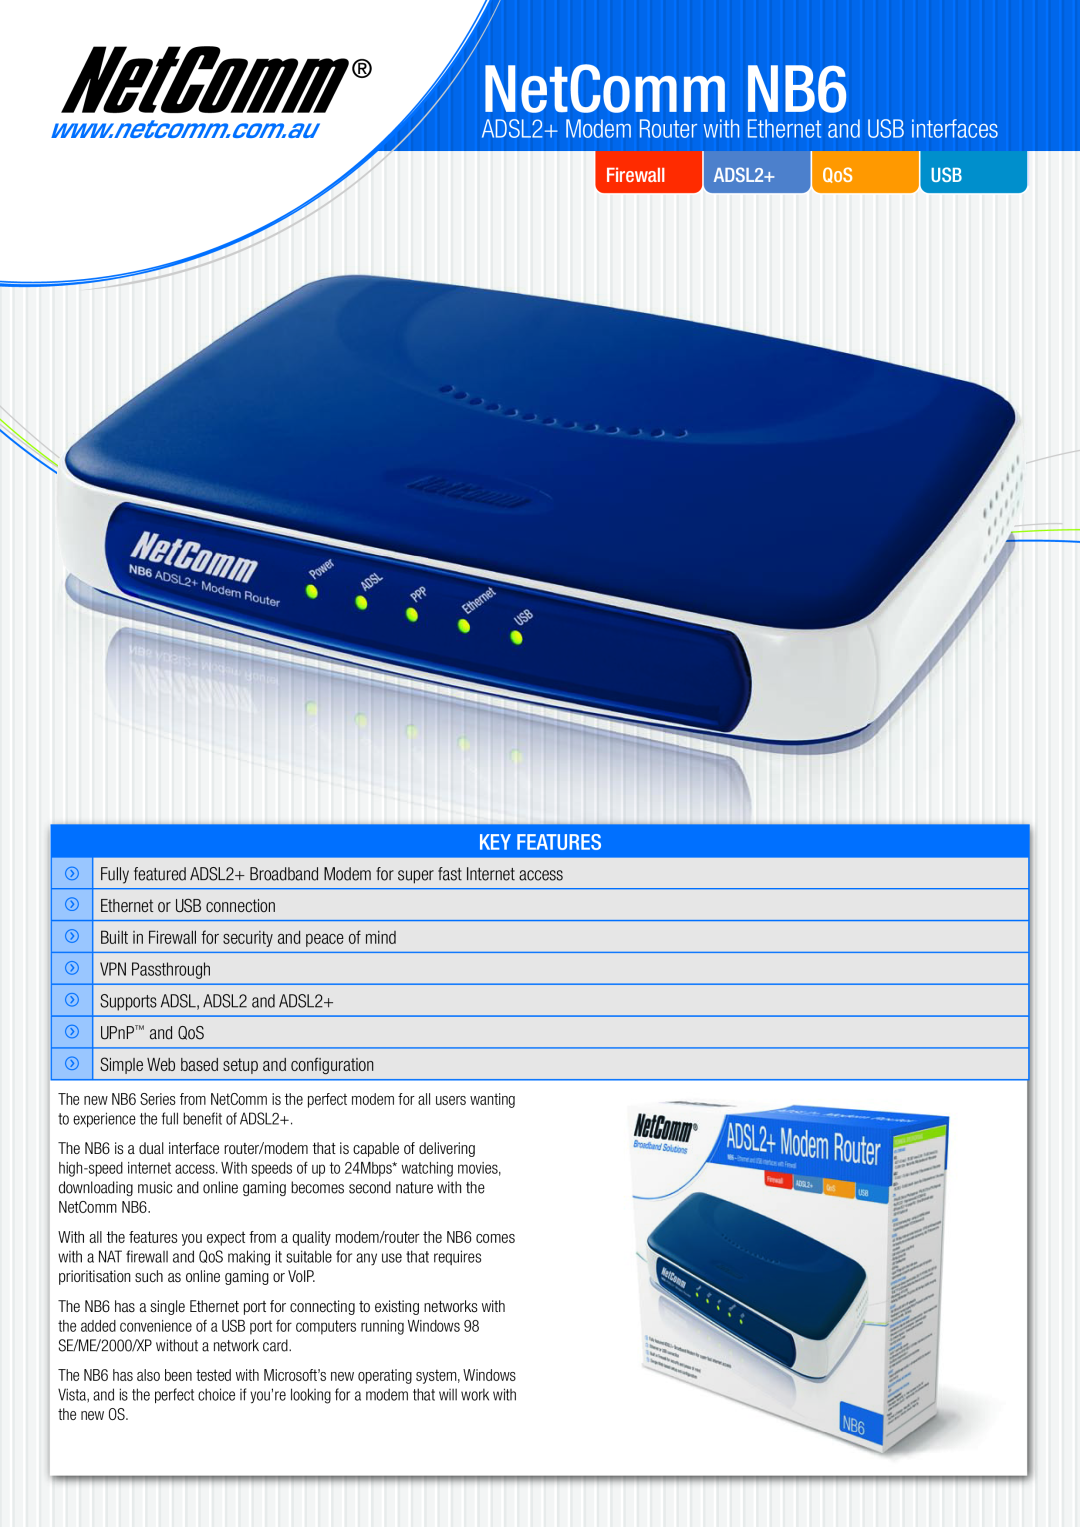 NetComm manual NetComm NB6, ADSL2+ Modem Router with Ethernet and USB interfaces, Key Features, Firewall 